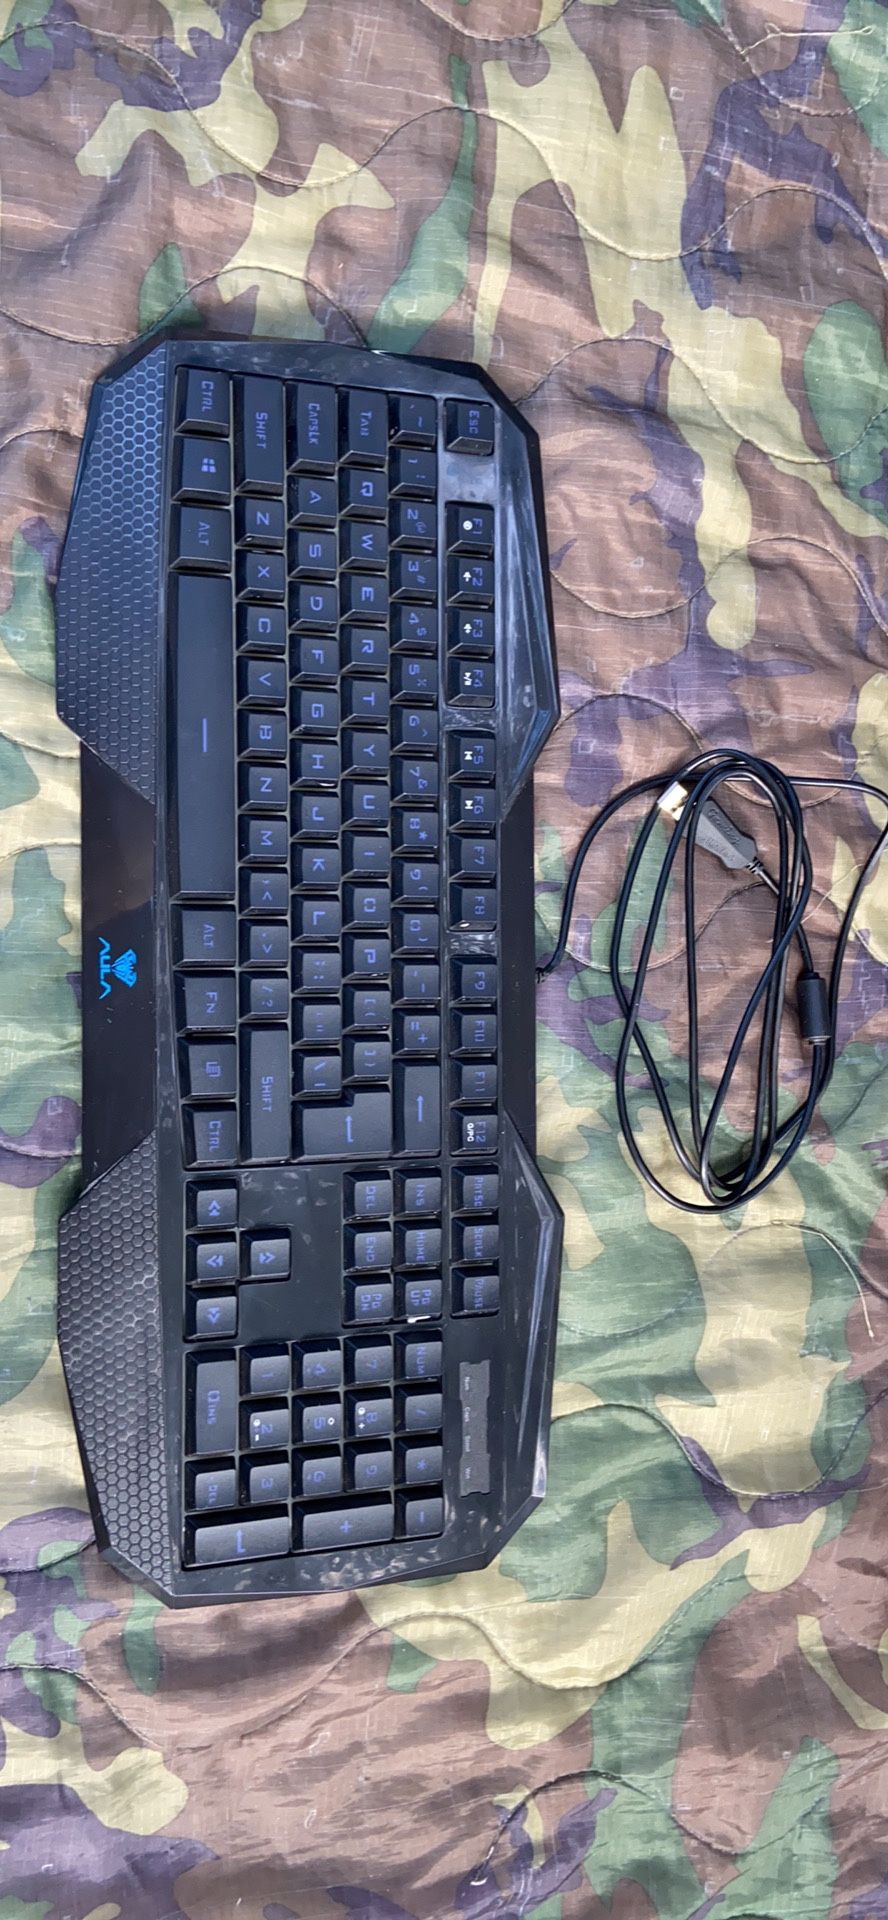 Crossfire Aula Gaming Keyboard and Onn Wireless Mouse